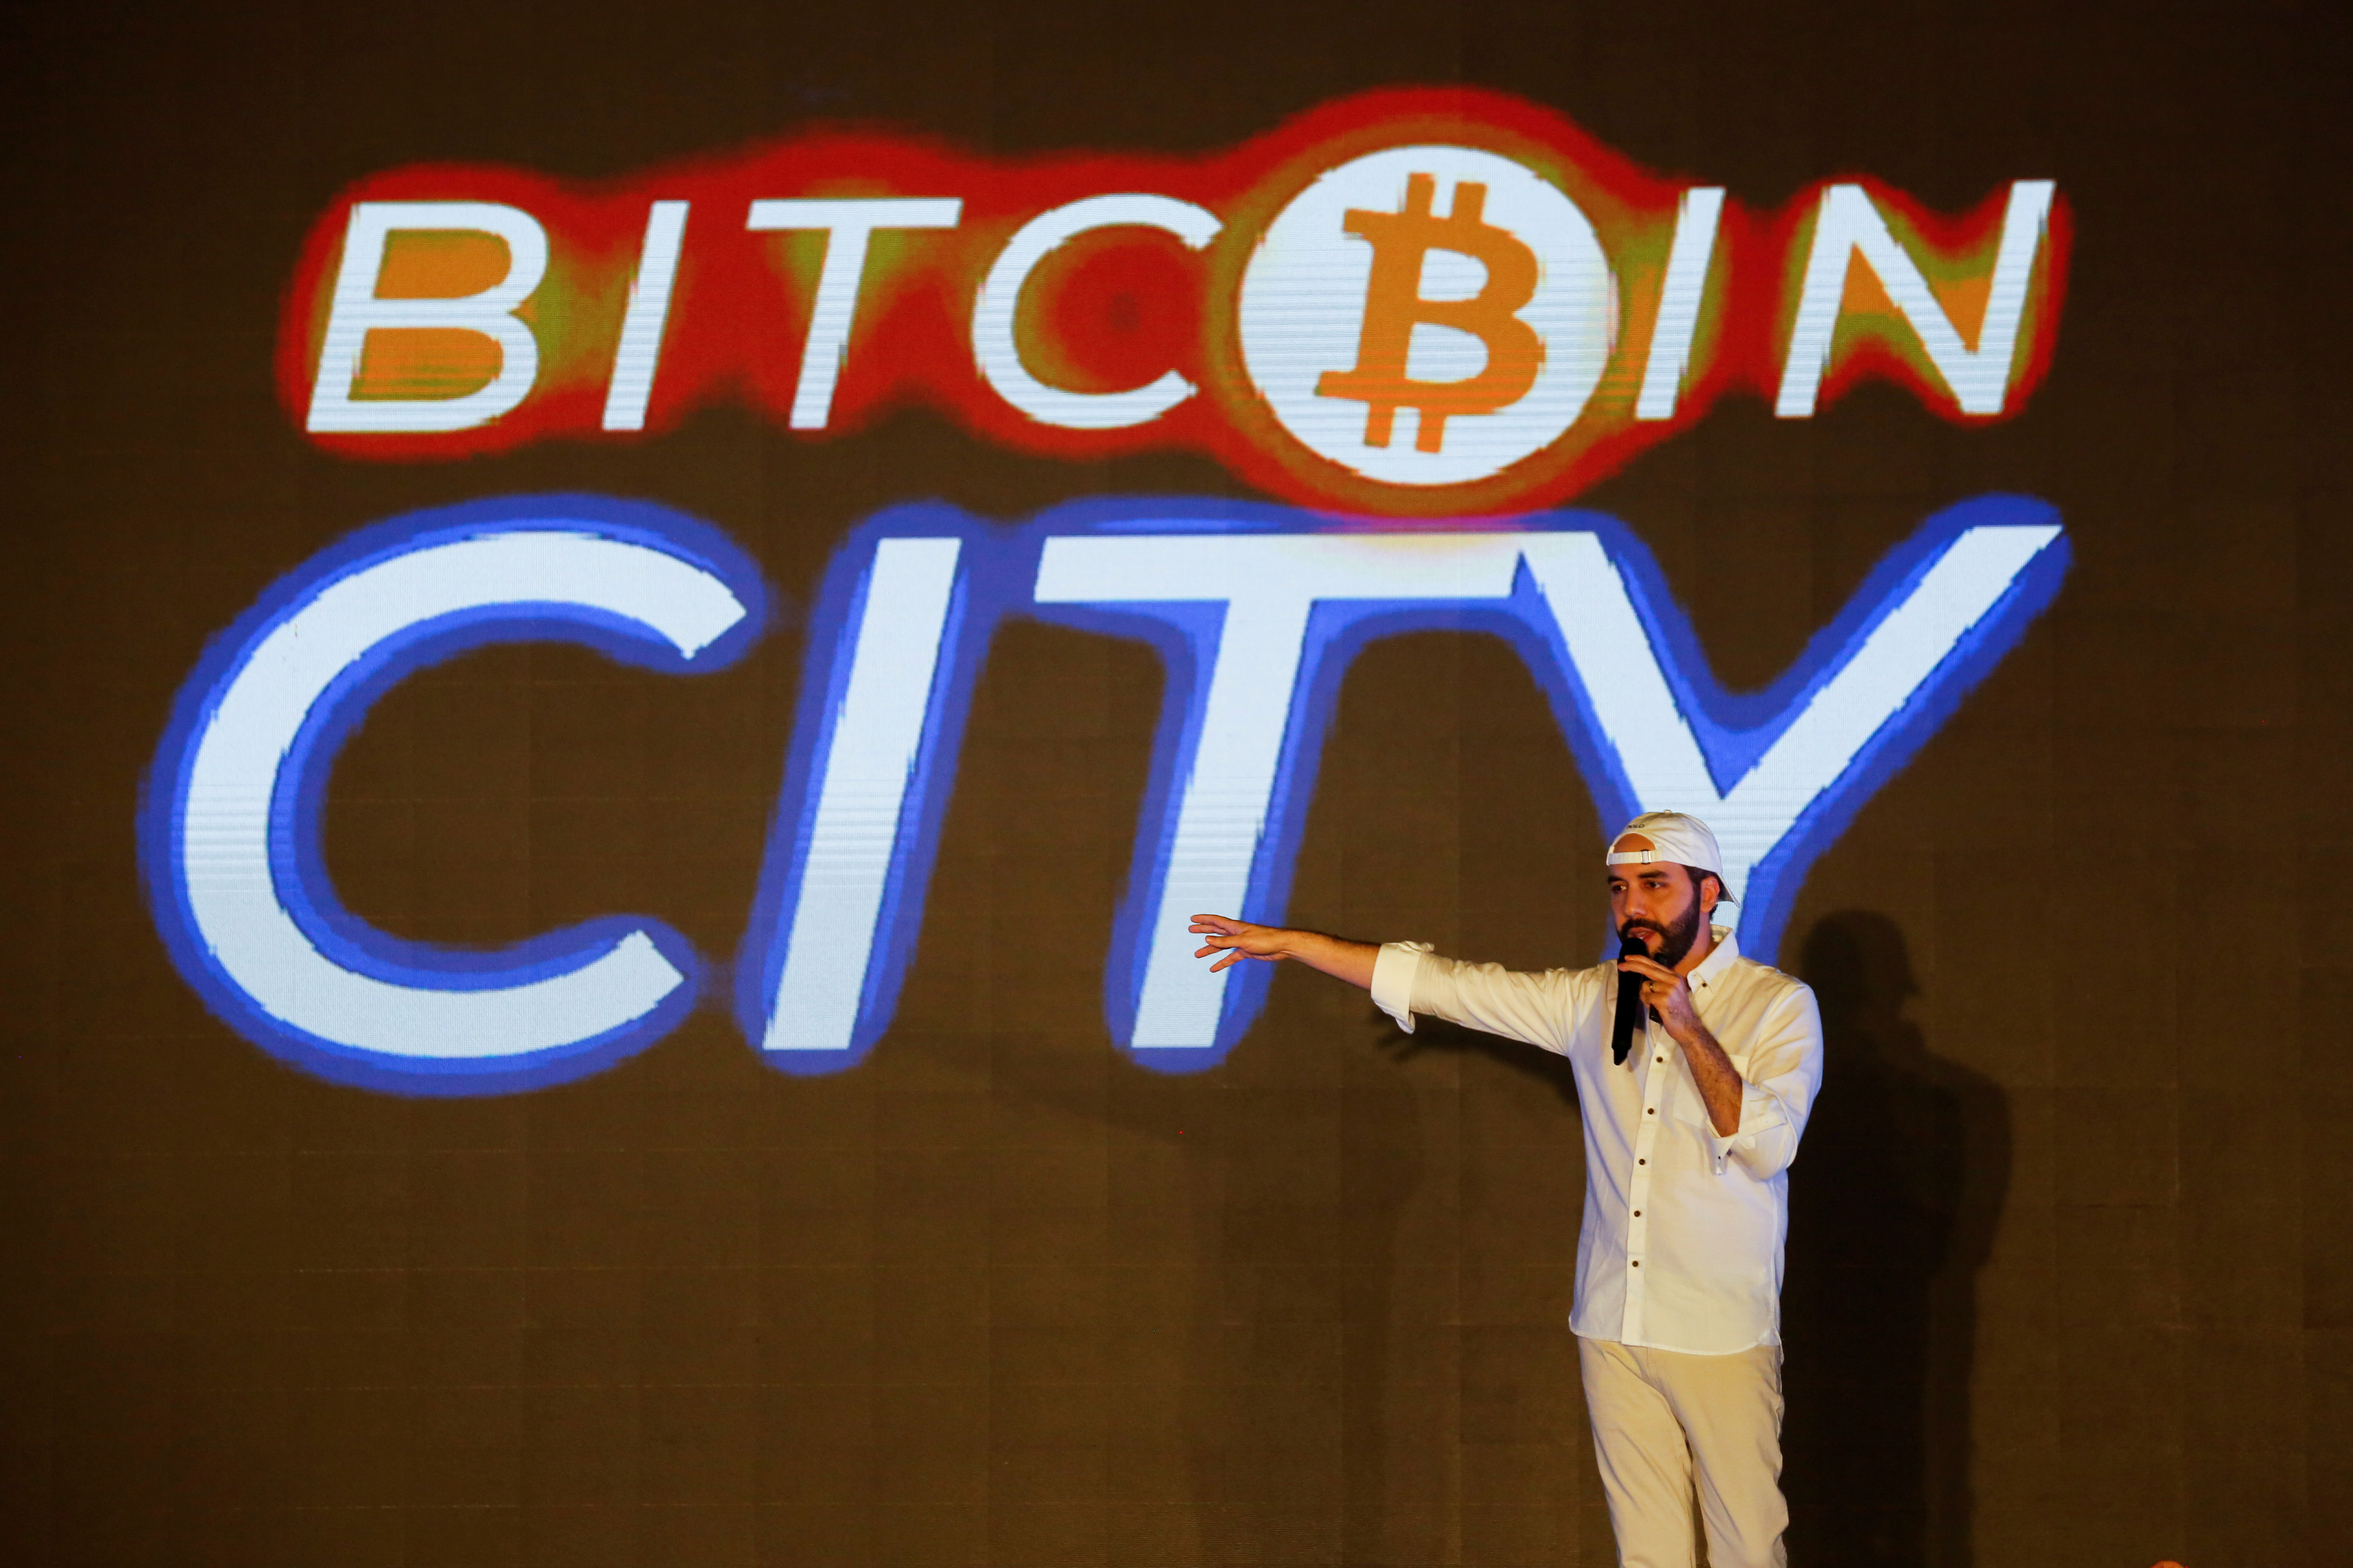 El Salvador's president Nayib Bukele speaks at the closing party of the “Bitcoin Week” where he announced the plan to build the first 